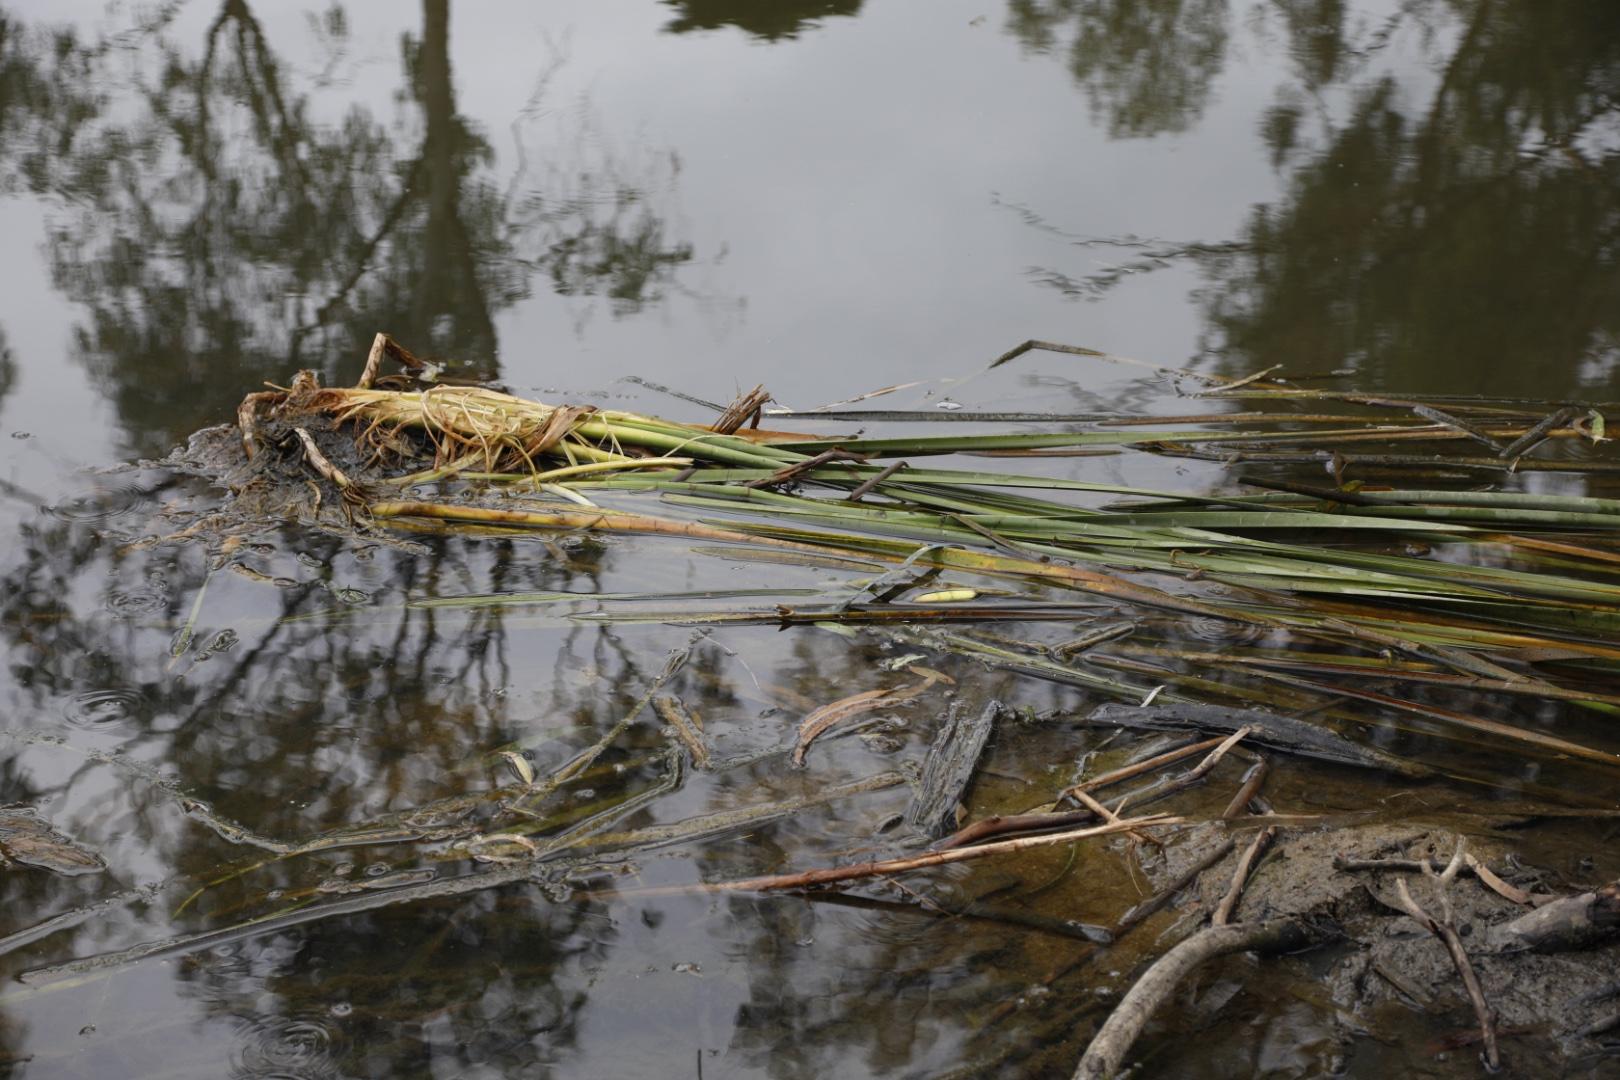 Floating reeds from earlier flood at site